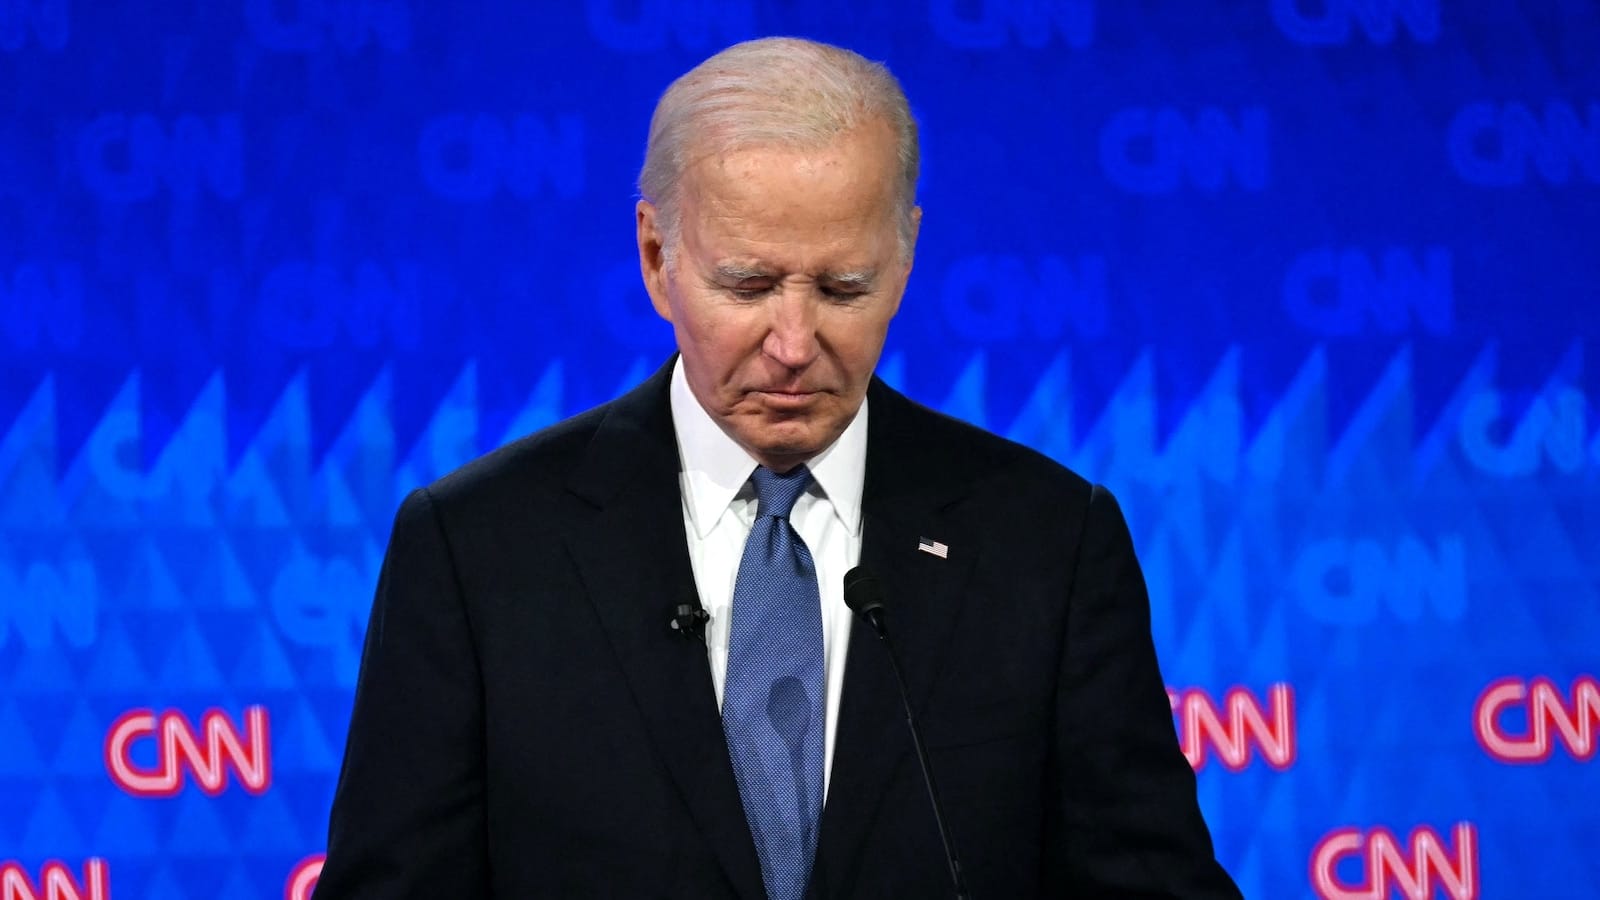 Biden Meets with Family at Camp David to Discuss Future of Presidential Campaign Following Debate Setback